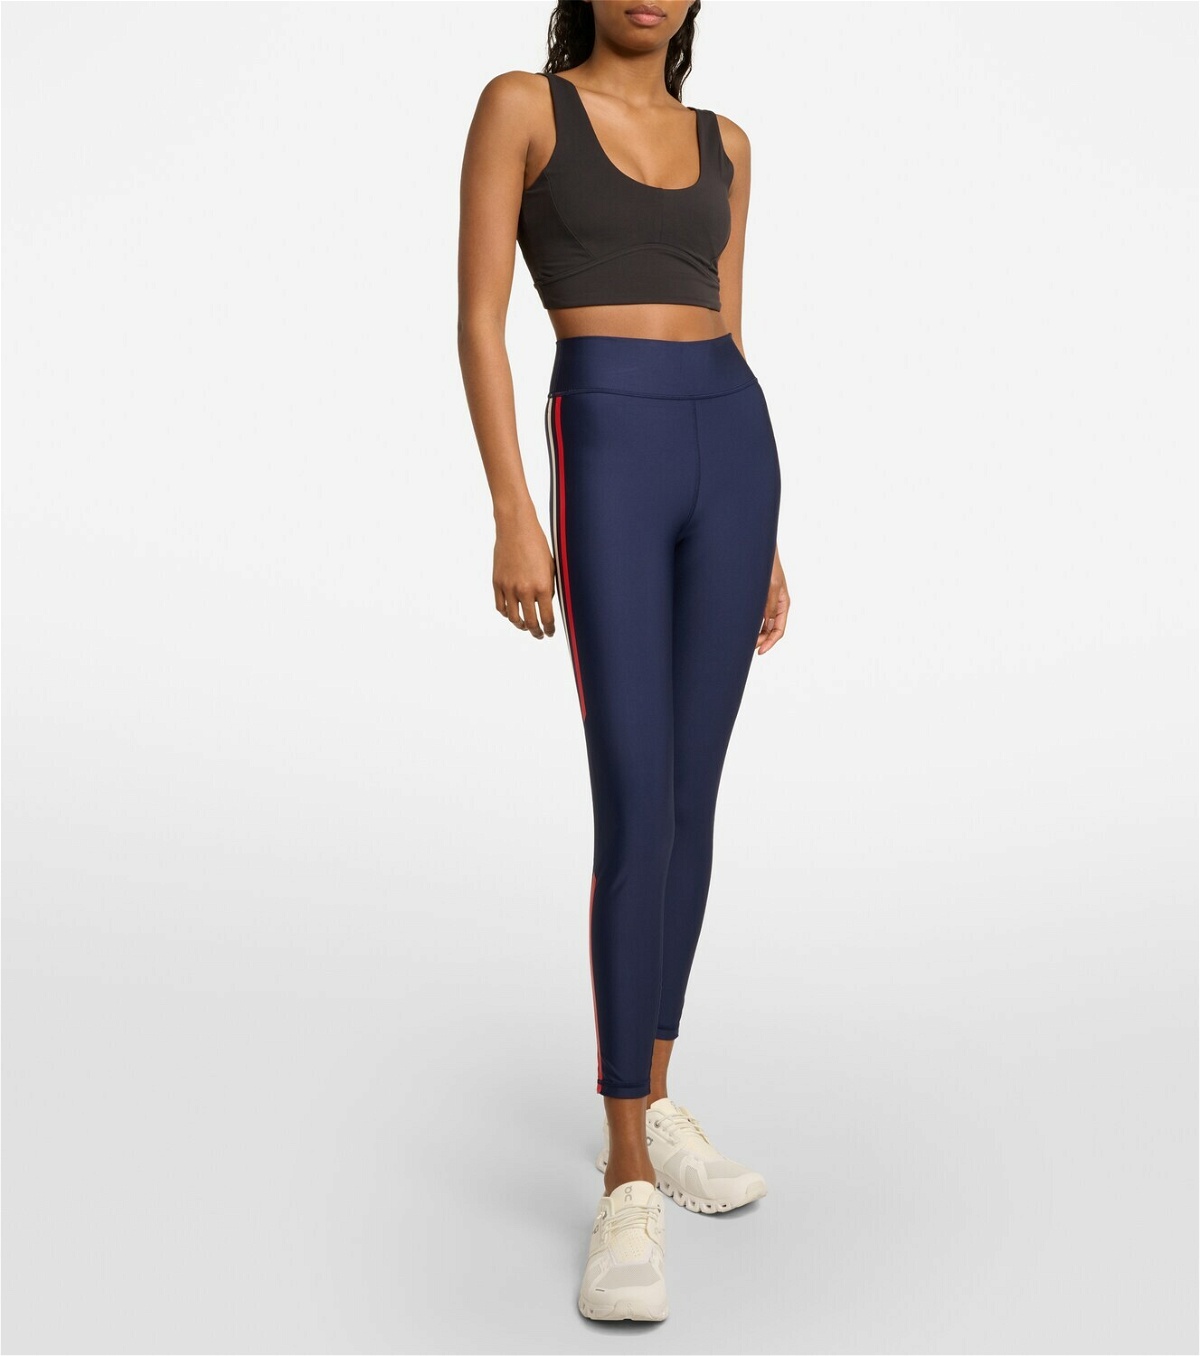 The Upside Playback high-rise leggings The Upside